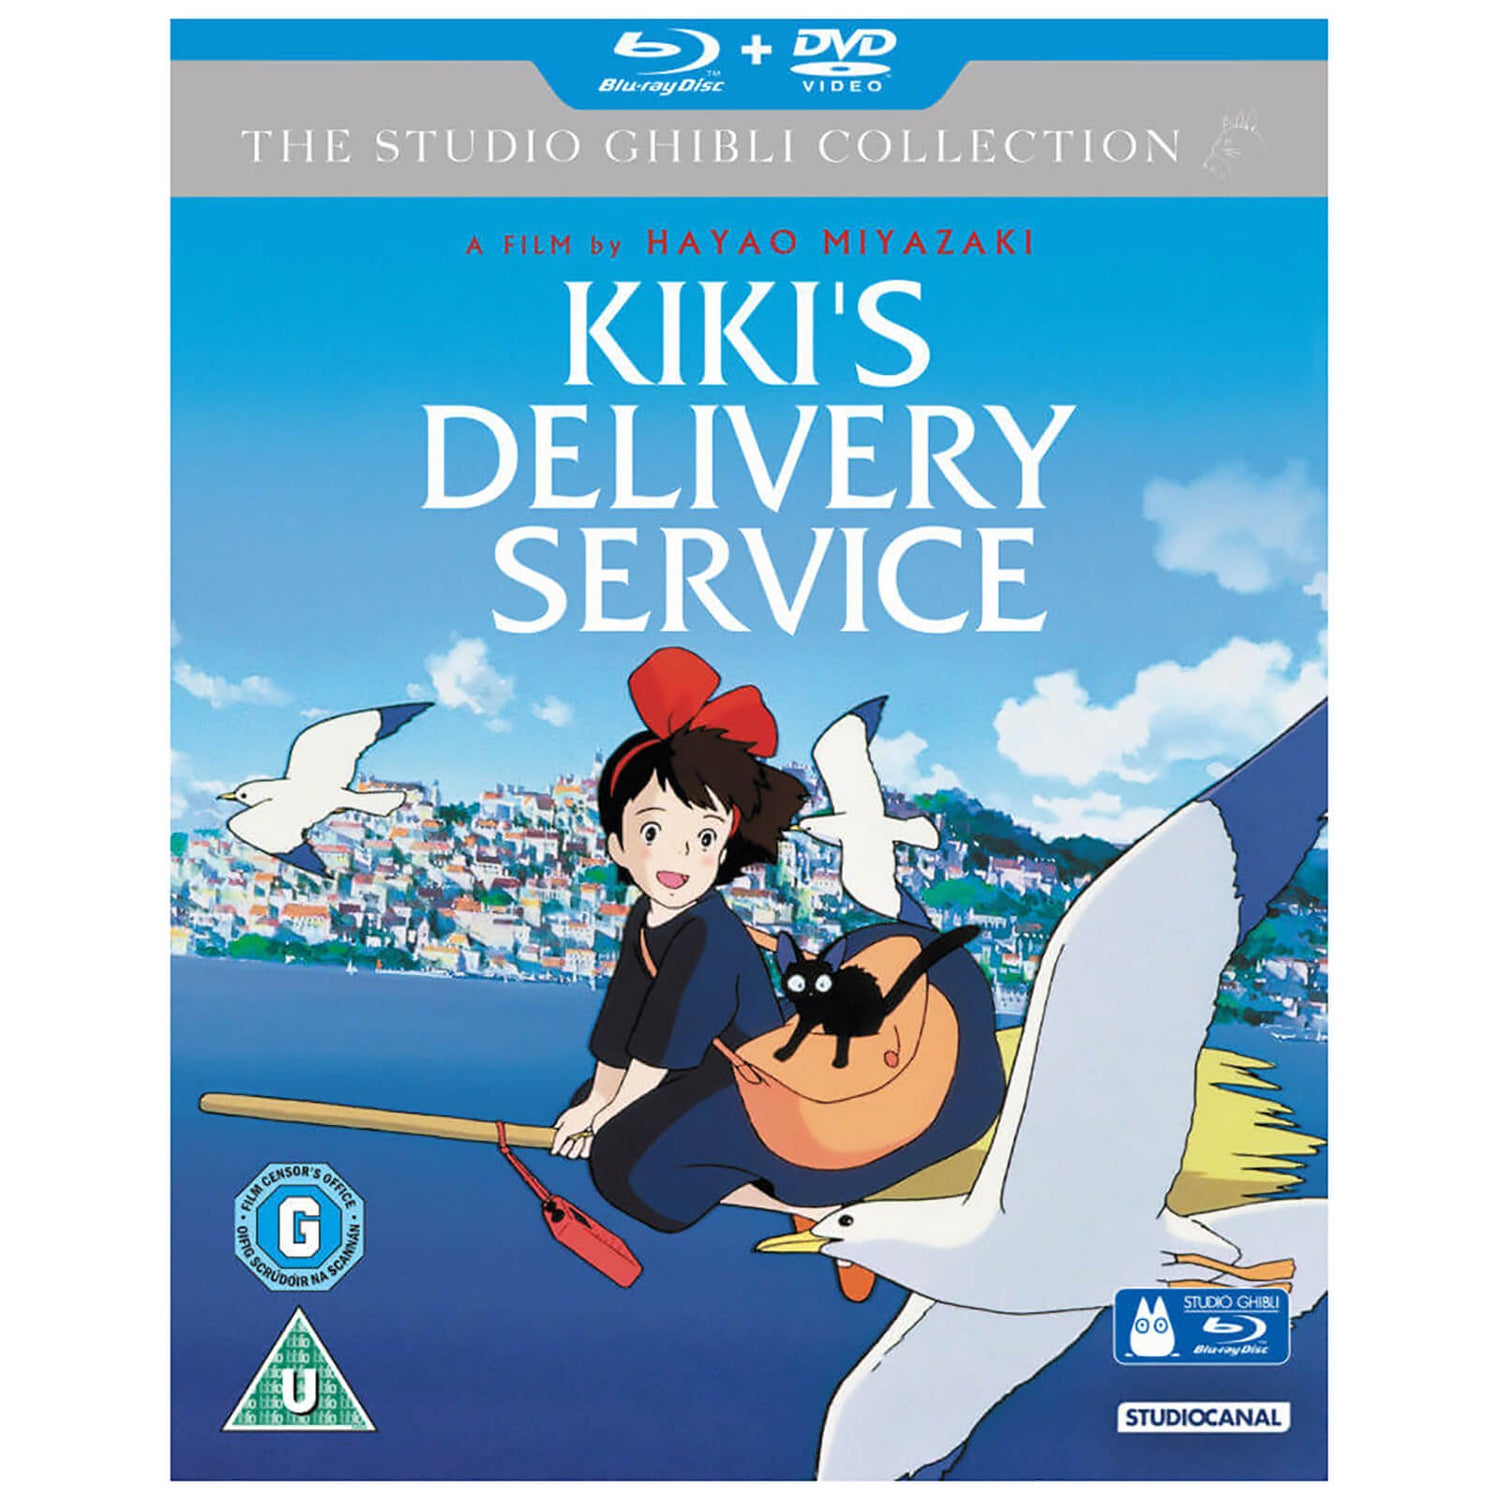 Kikis Delivery Service - Double Play (Blu-Ray et DVD)